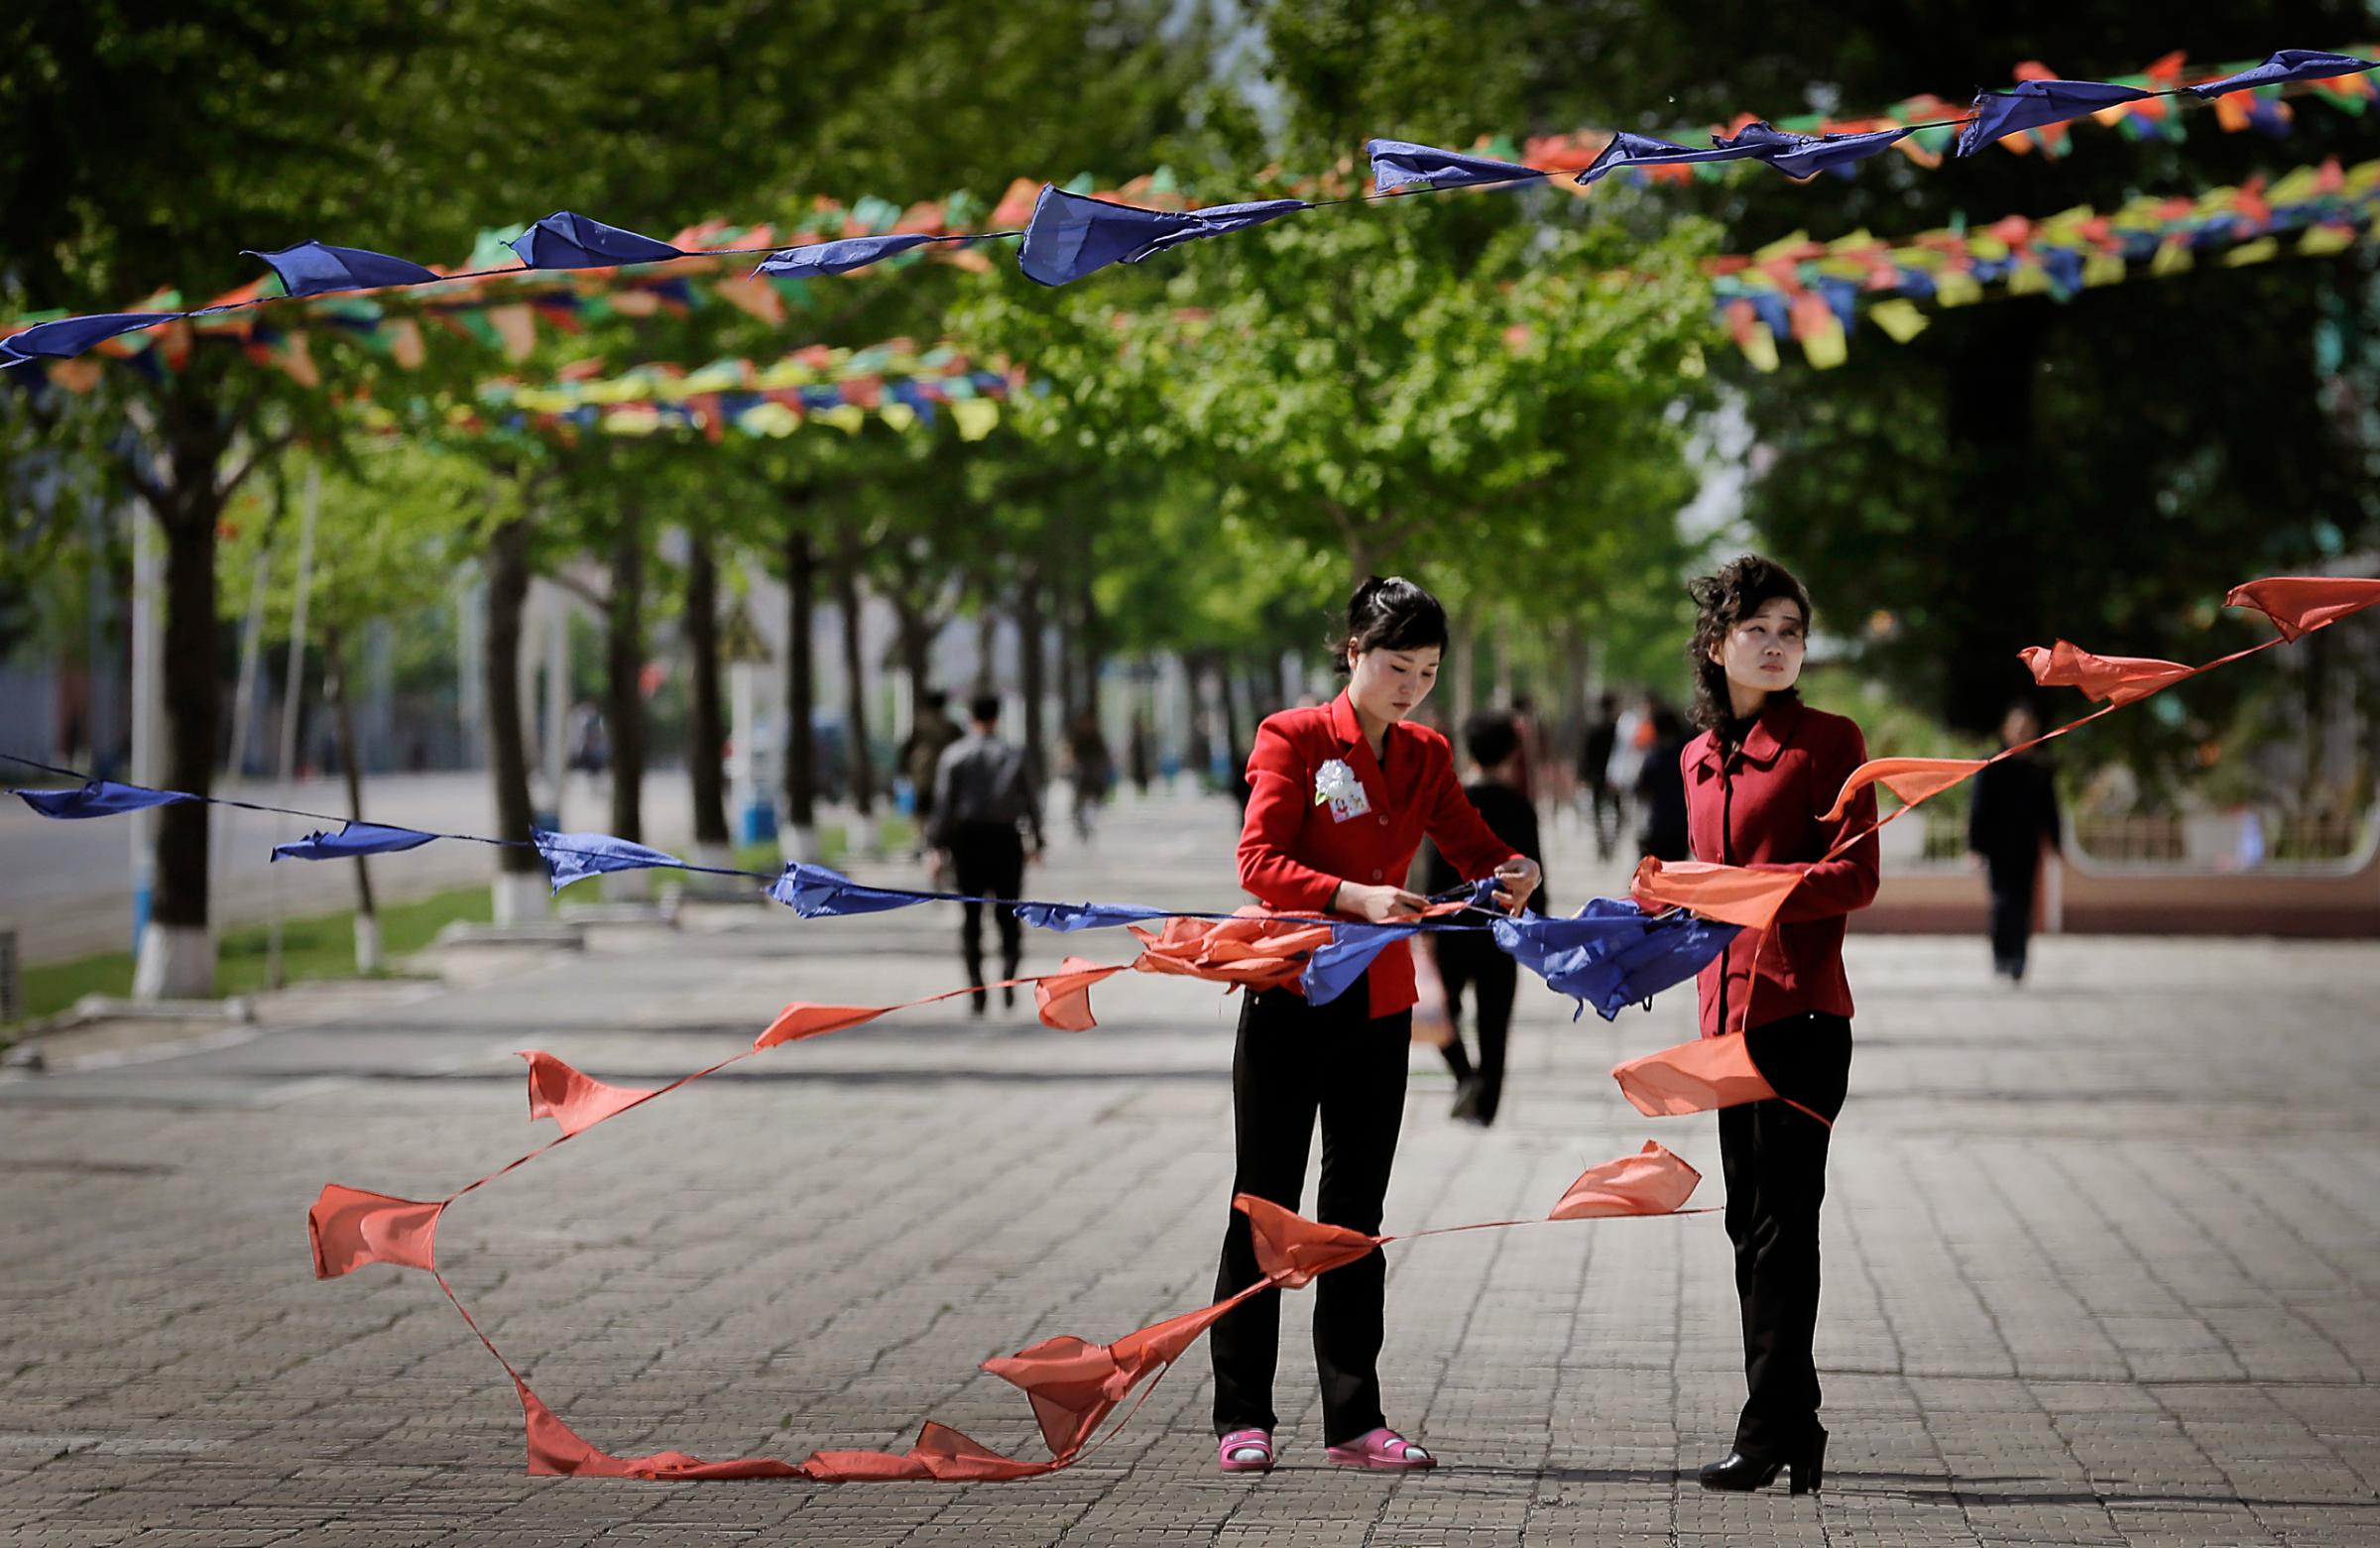 North Korean women tie flags as they decorate the streets in downtown Pyongyang, North Korea Saturday, May 7, 2016. North Korean leader Kim Jong Un hailed his country's recent nuclear test to uproarious applause as he convened the first full congress of its ruling party since 1980, an event intended to showcase the North's stability and unity in the face of tough international sanctions and deepening isolation. (AP Photo/Wong Maye-E)